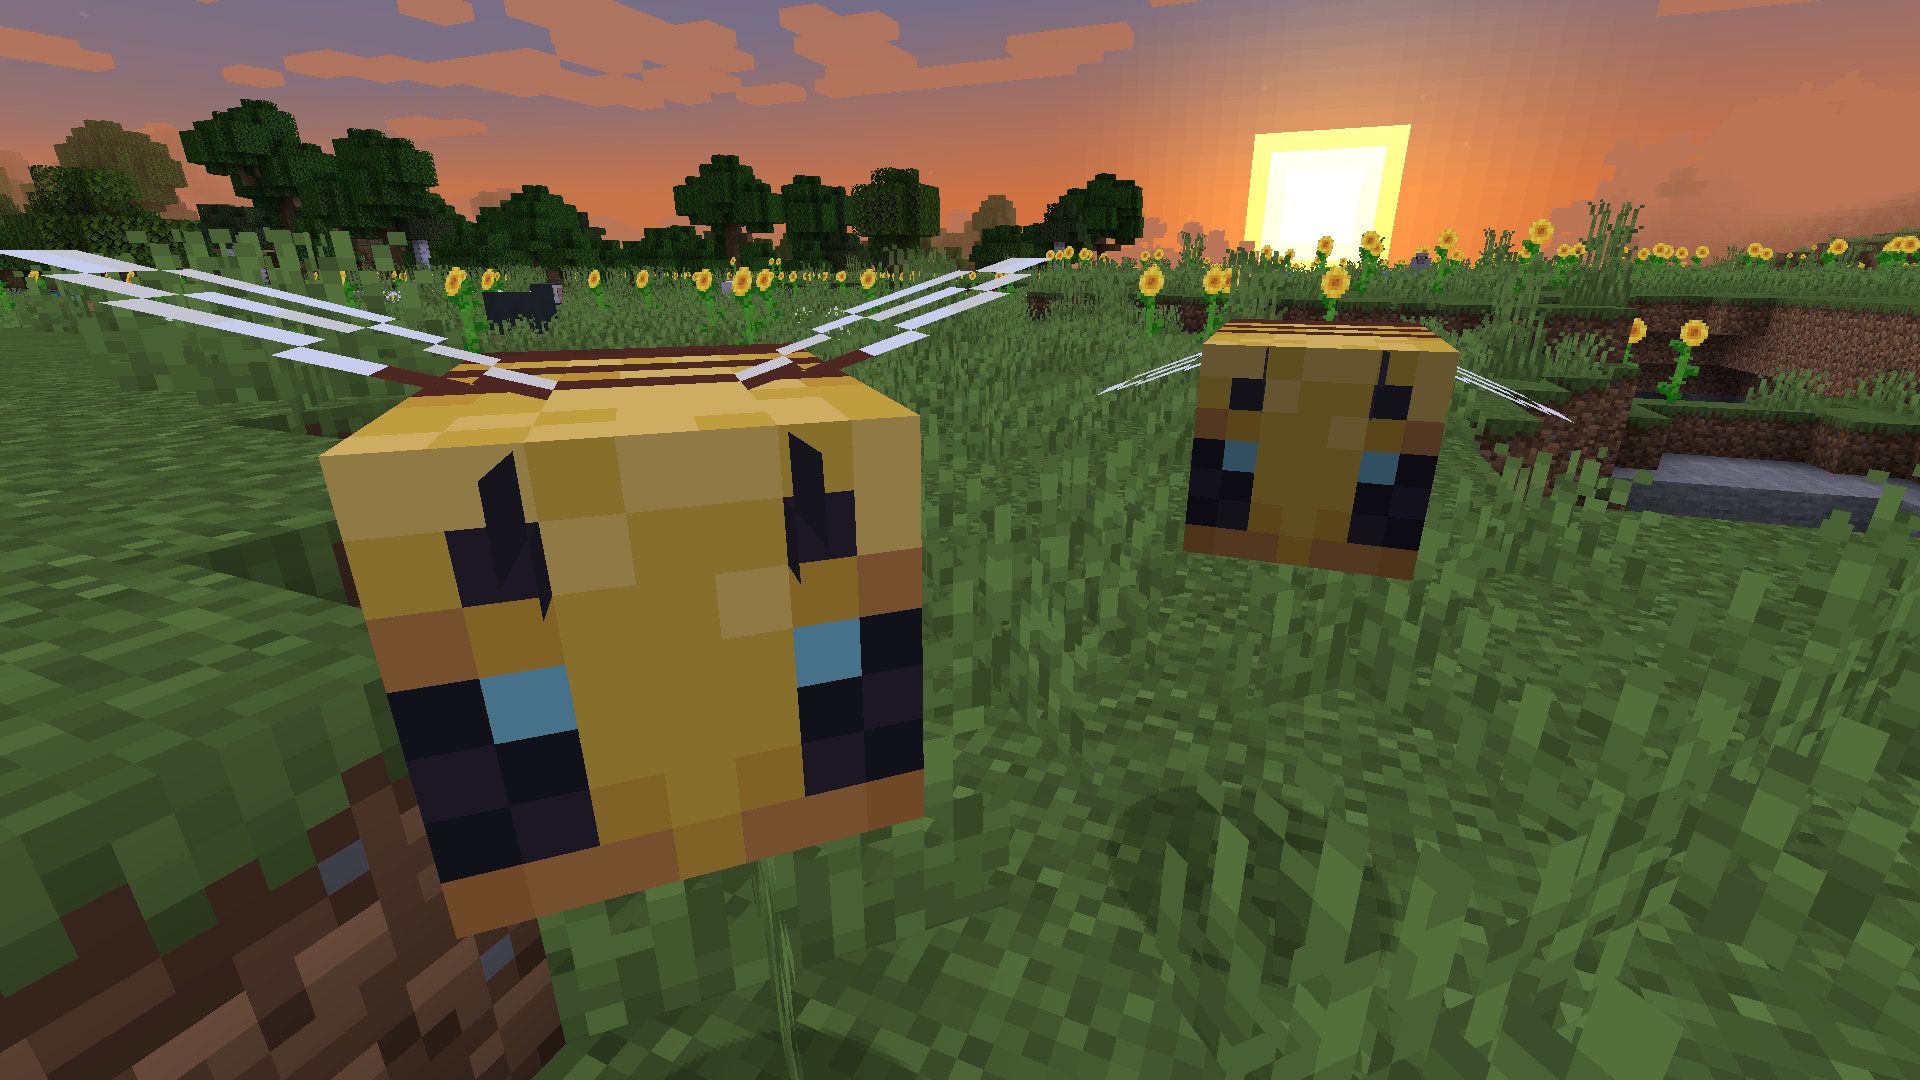 A Quick Busy Bee Look at Minecraft's Buzzy Bee Update